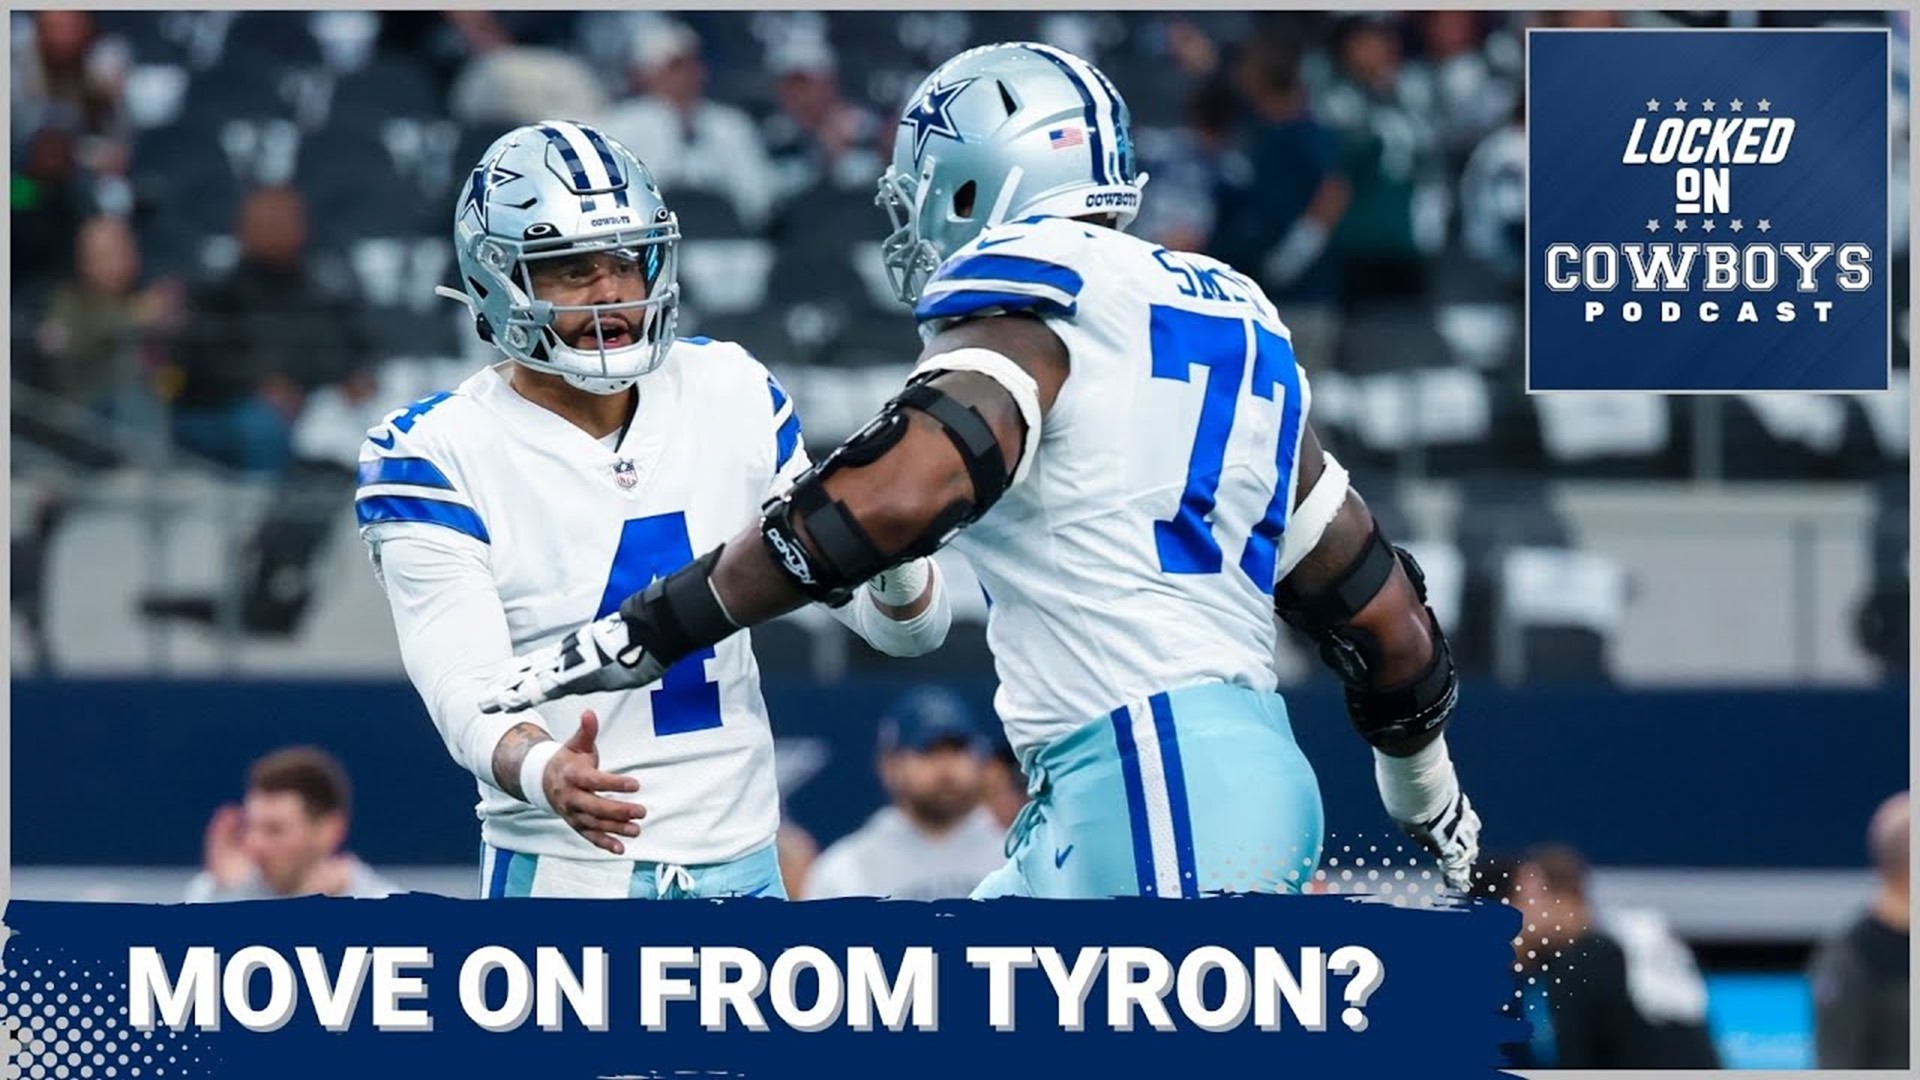 Marcus Mosher & Landon McCool of Locked On Cowboys discuss the play of Tyron Smith and if the Cowboys should consider moving on from him this offseason. Plus more!